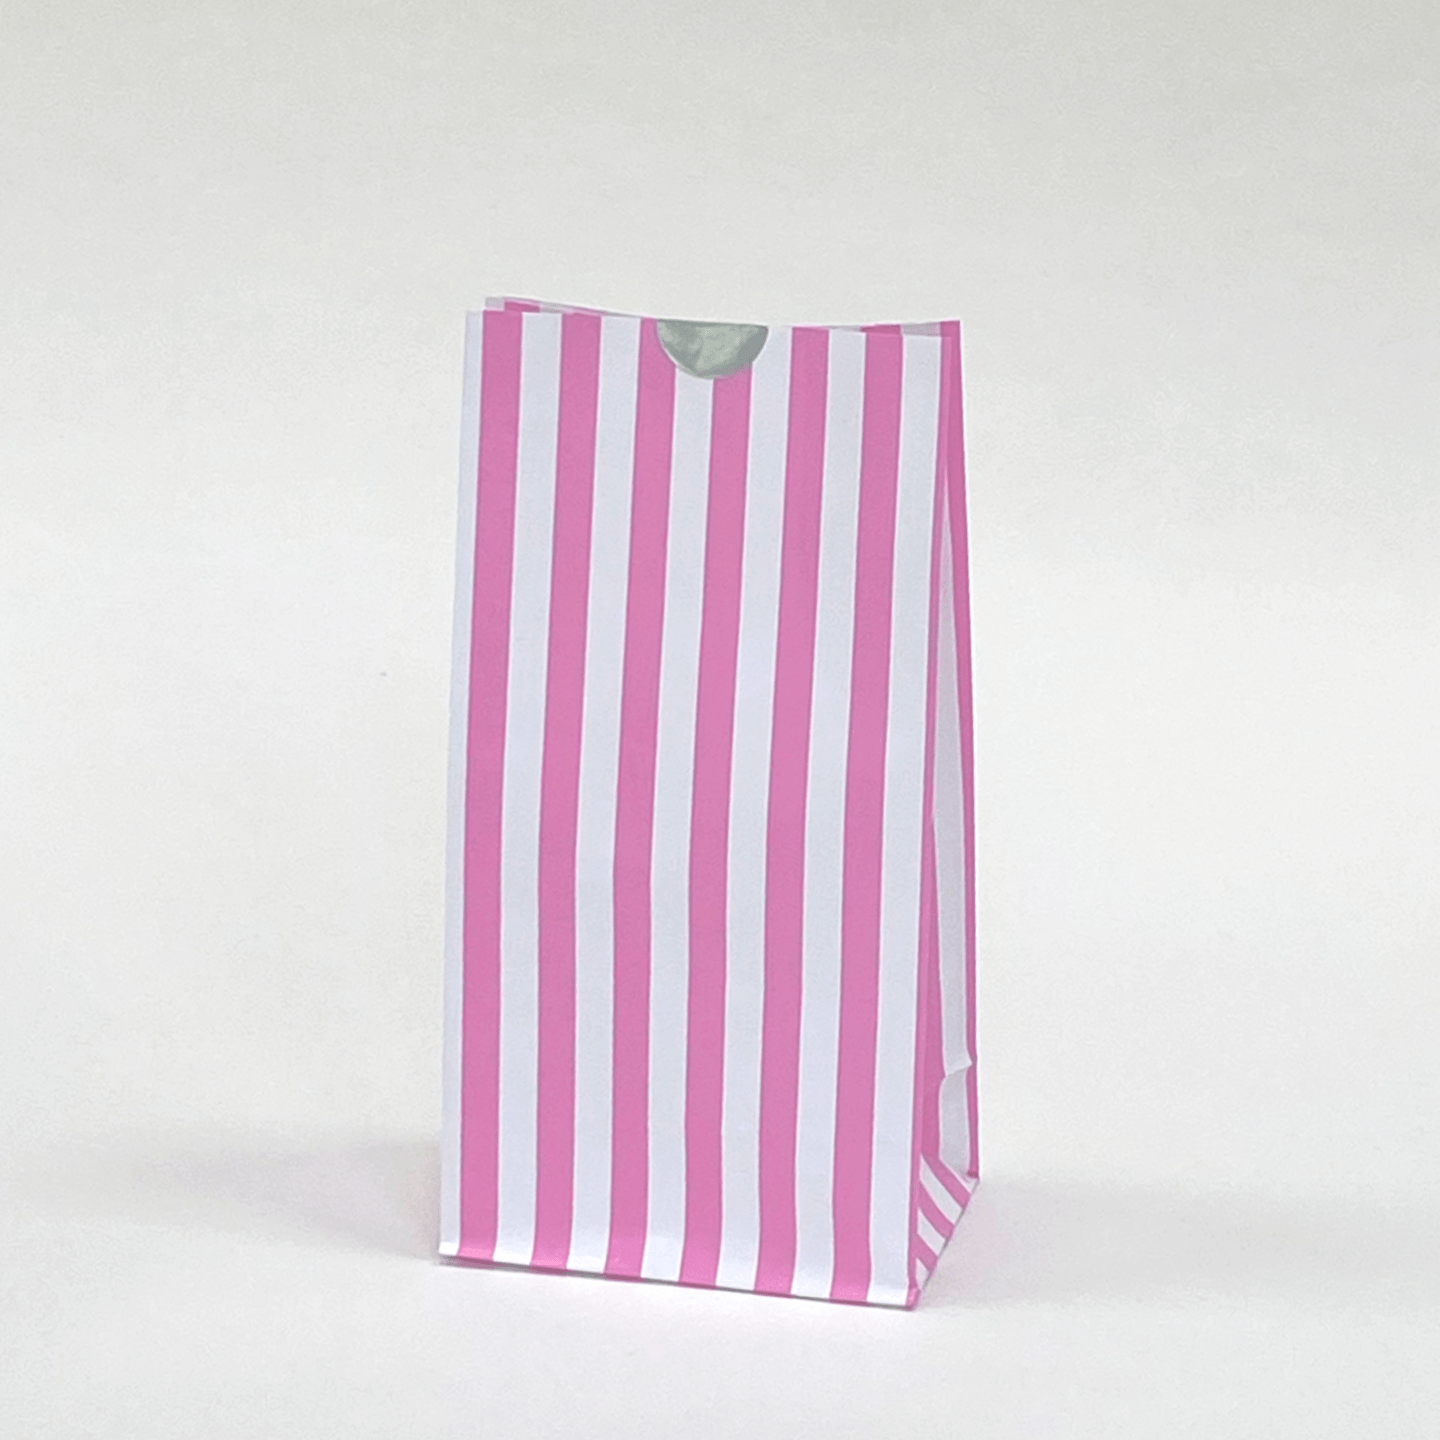 Pink Striped Party Bags | Candy striped Paper Bags | Party Bags UK playwrite